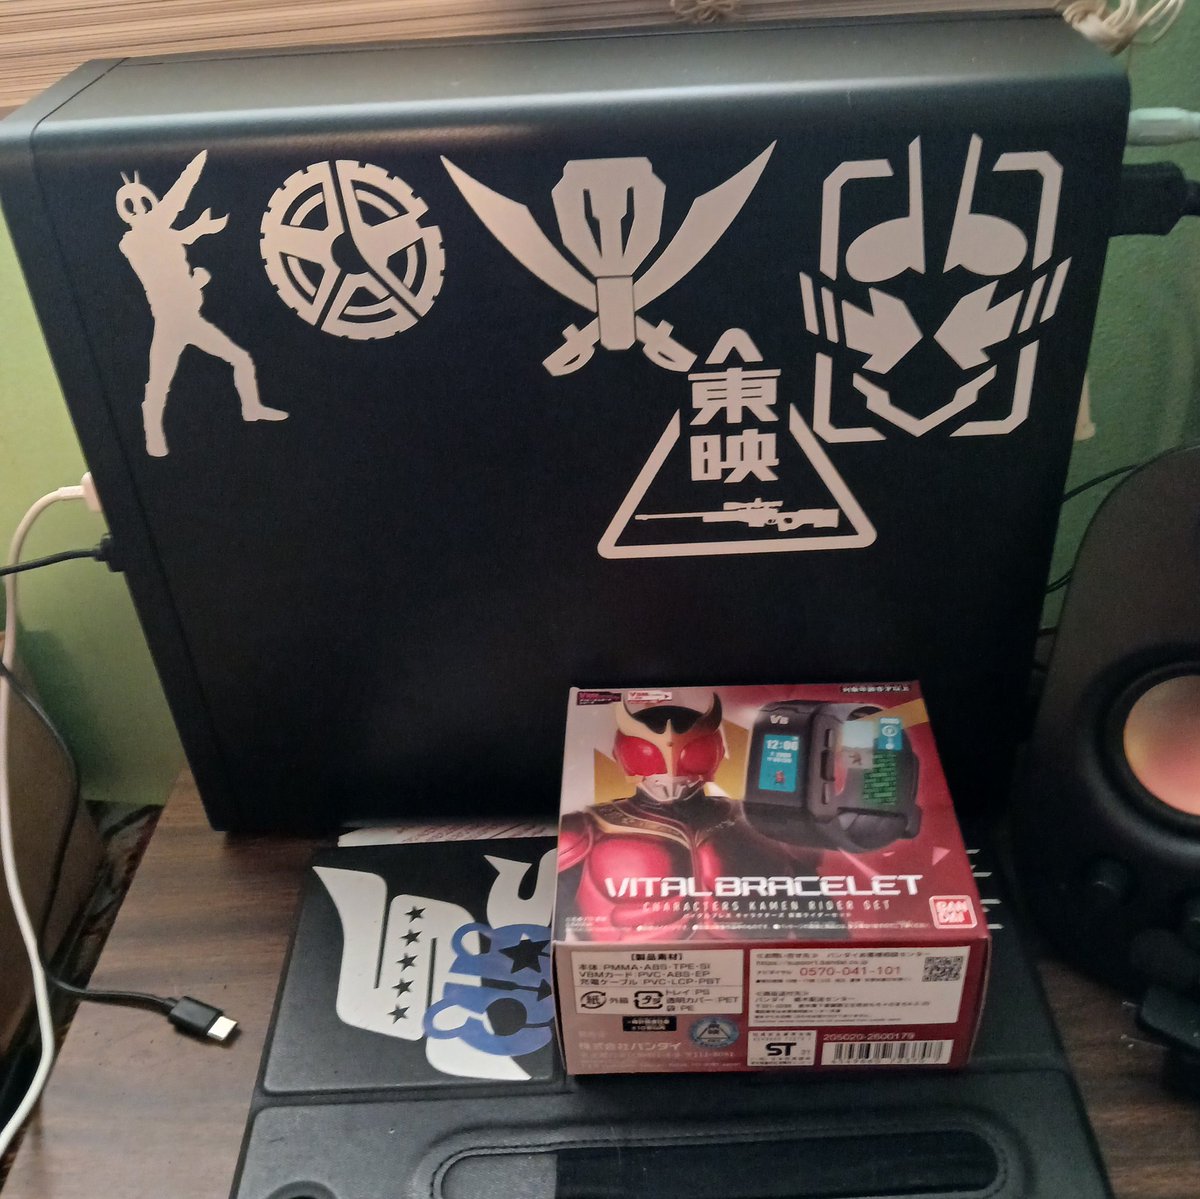 New computer getting covered in test cuts! #tokusatsu #vinyldecals #ComingSoon 

Well I guess Boonboom and Gokaiger are available but they gotta be on there. Gonna cover this bitch up! 😁
rainbowlinecreations.etsy.com